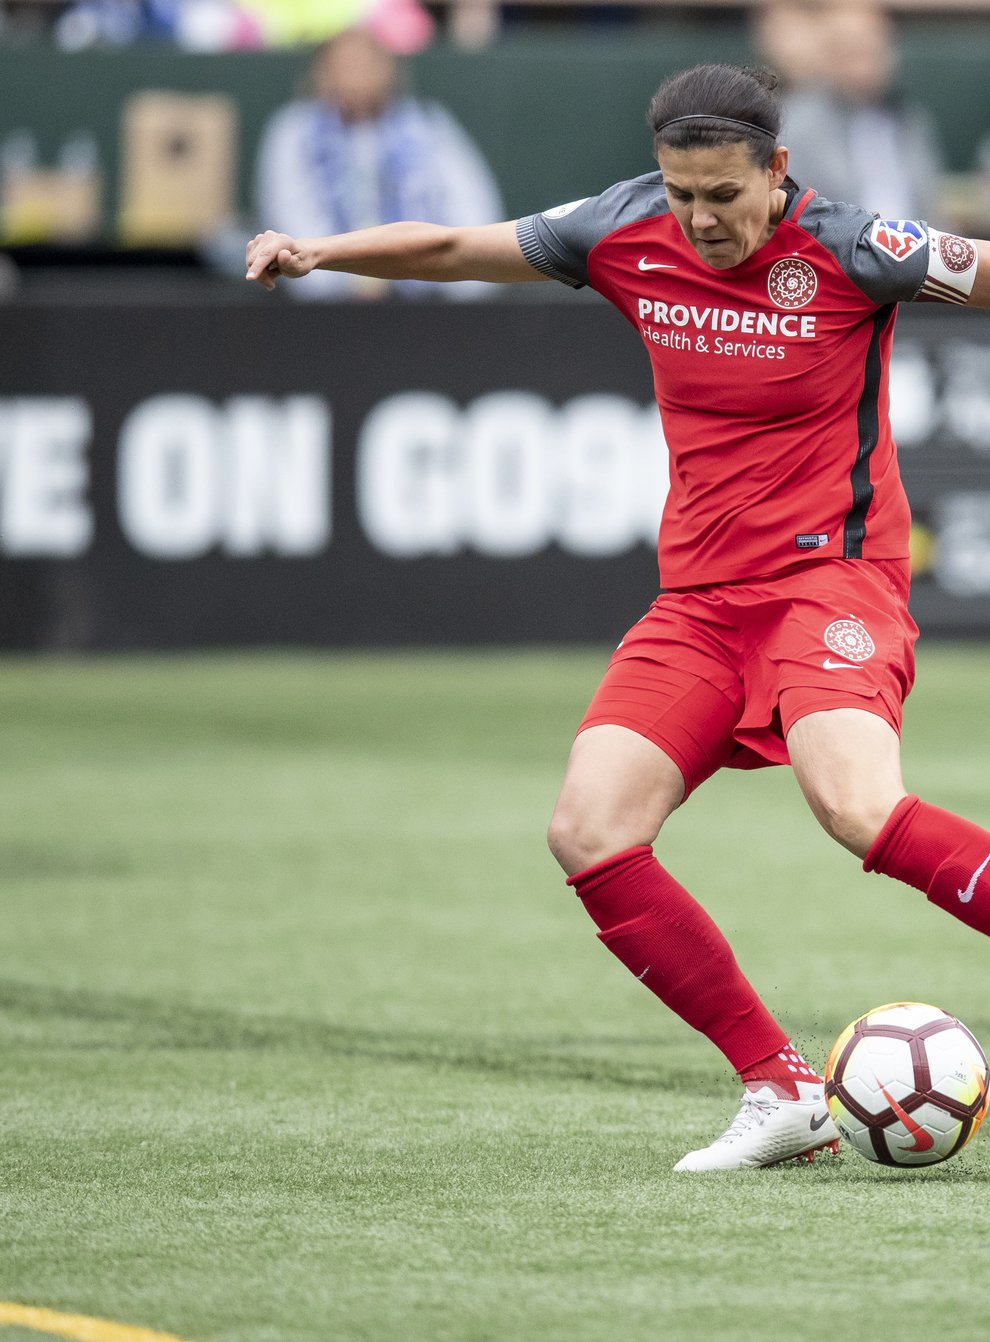 Thorns v Reign will now take place on September 30